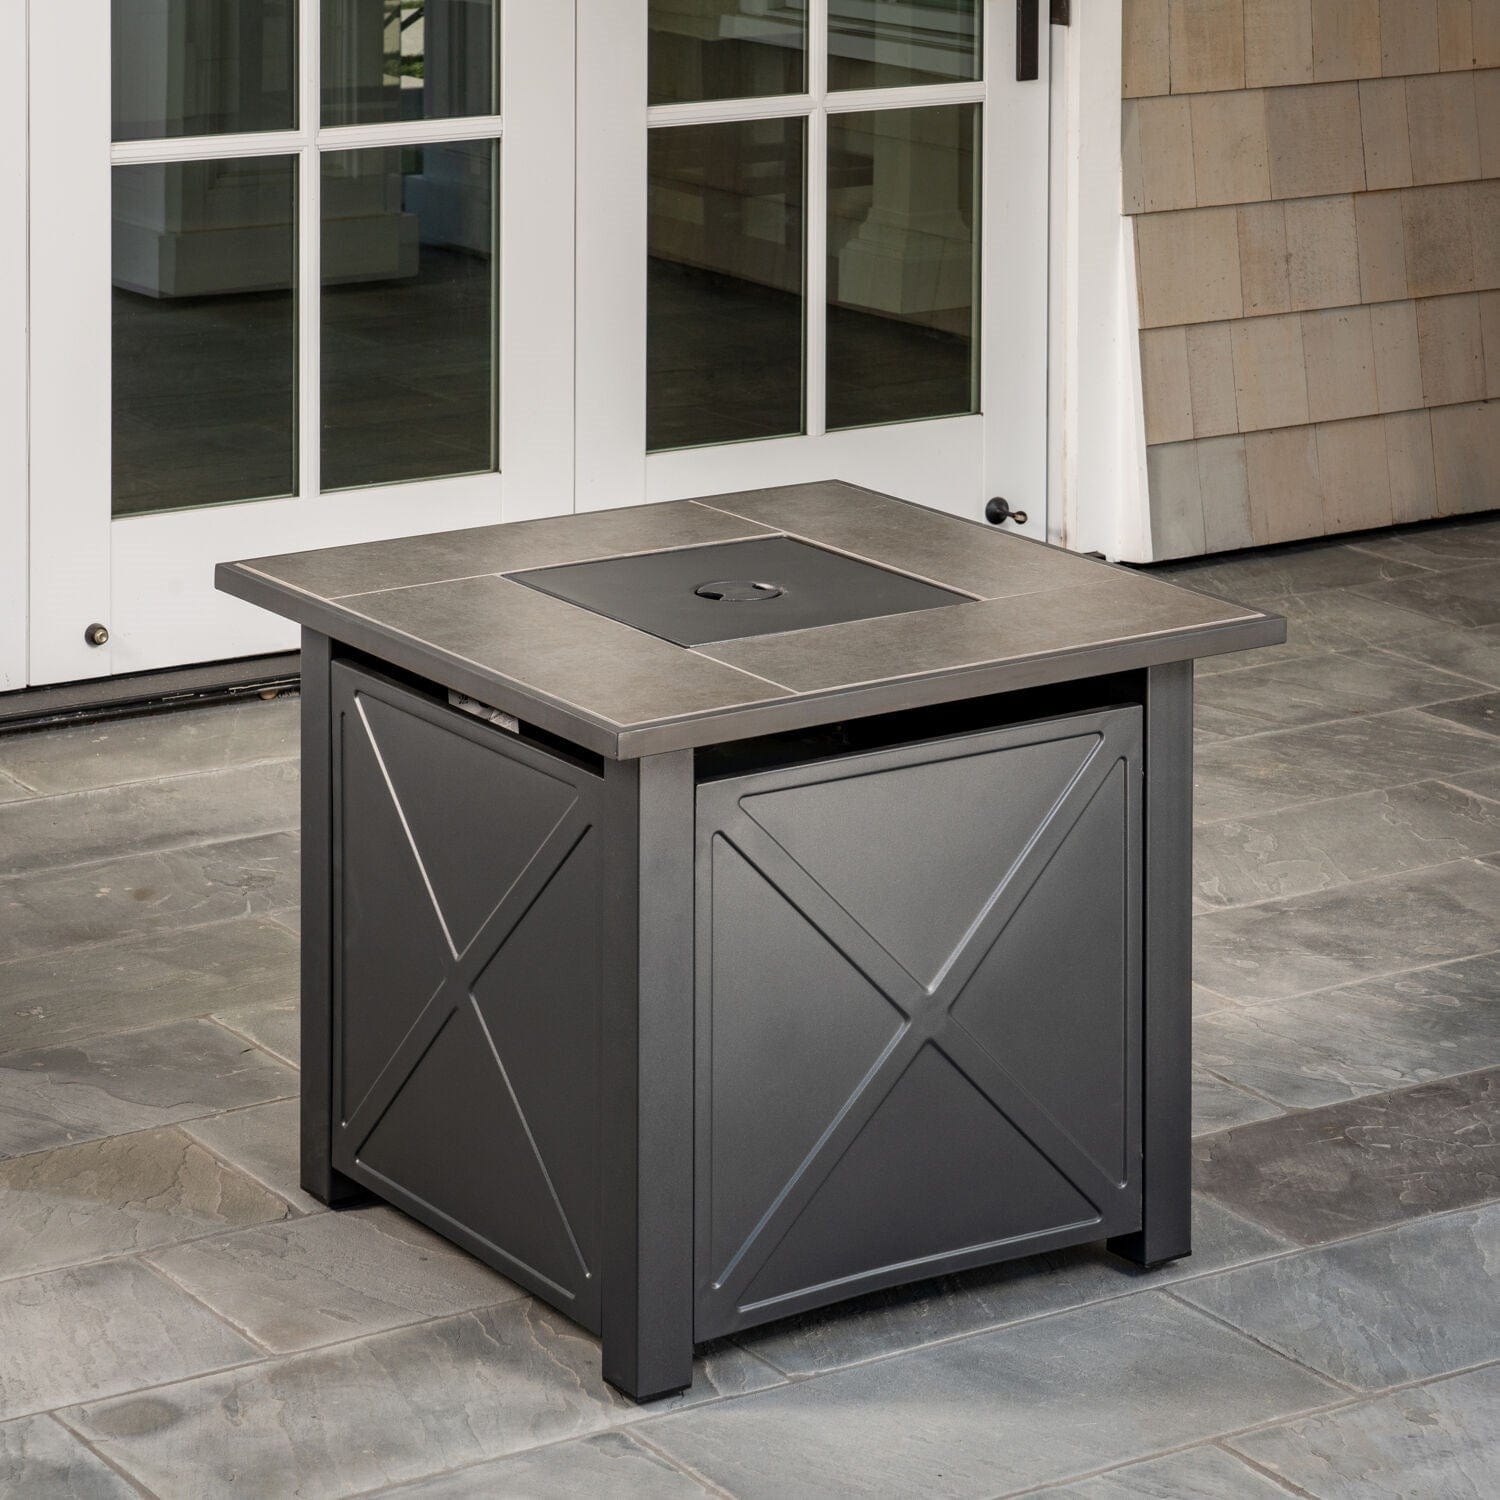 Hanover Fire Table Hanover - Naples Steel Gas Fire Pit with Tile Top and Light Gray Lava Rocks | 30x30 | NAPLES1PCFP